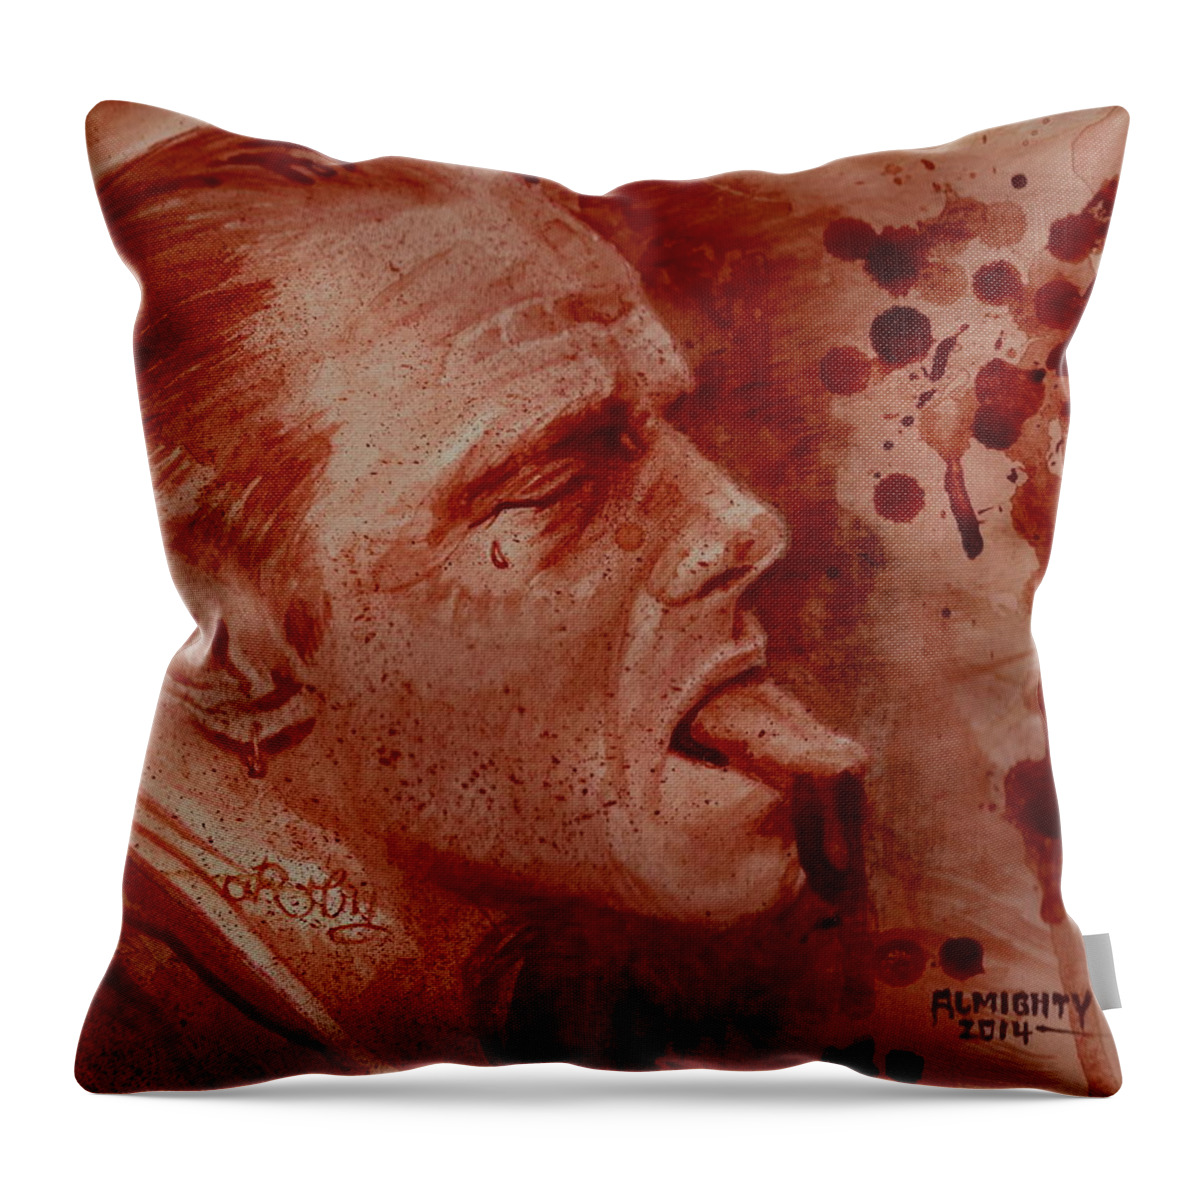 Fang Throw Pillow featuring the painting Sammytown by Ryan Almighty